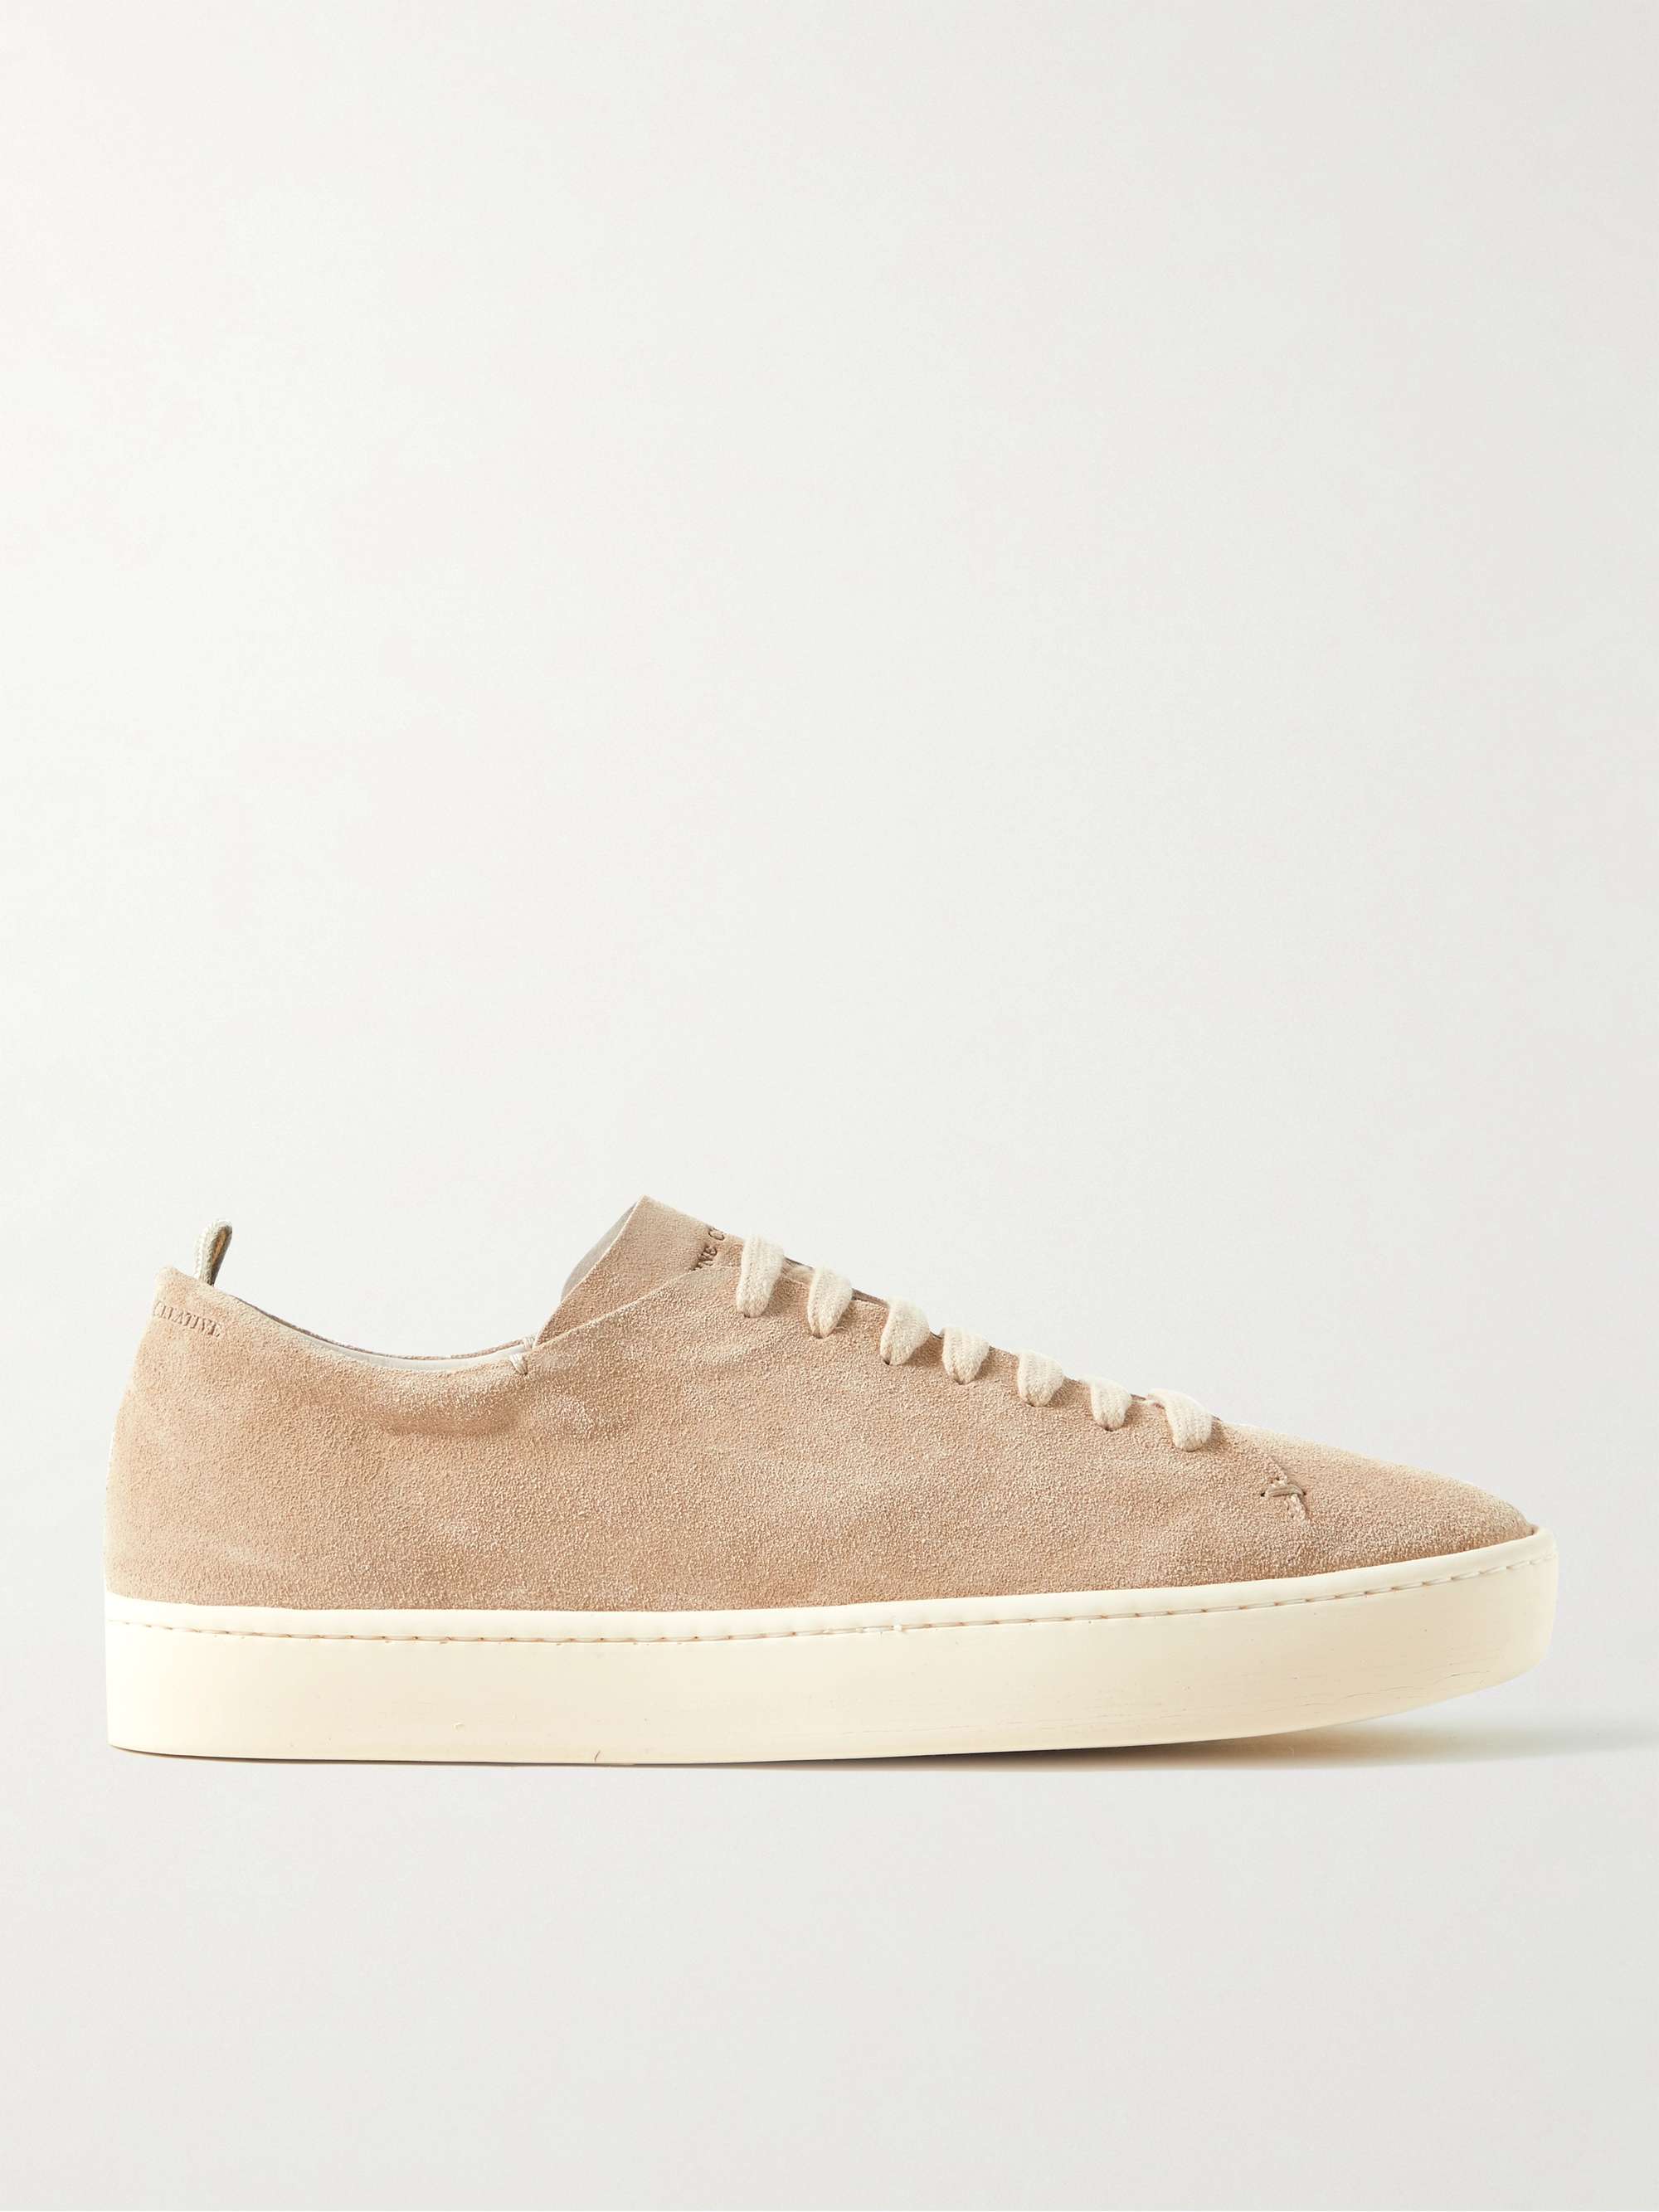 OFFICINE CREATIVE Kreig Leather Sneakers